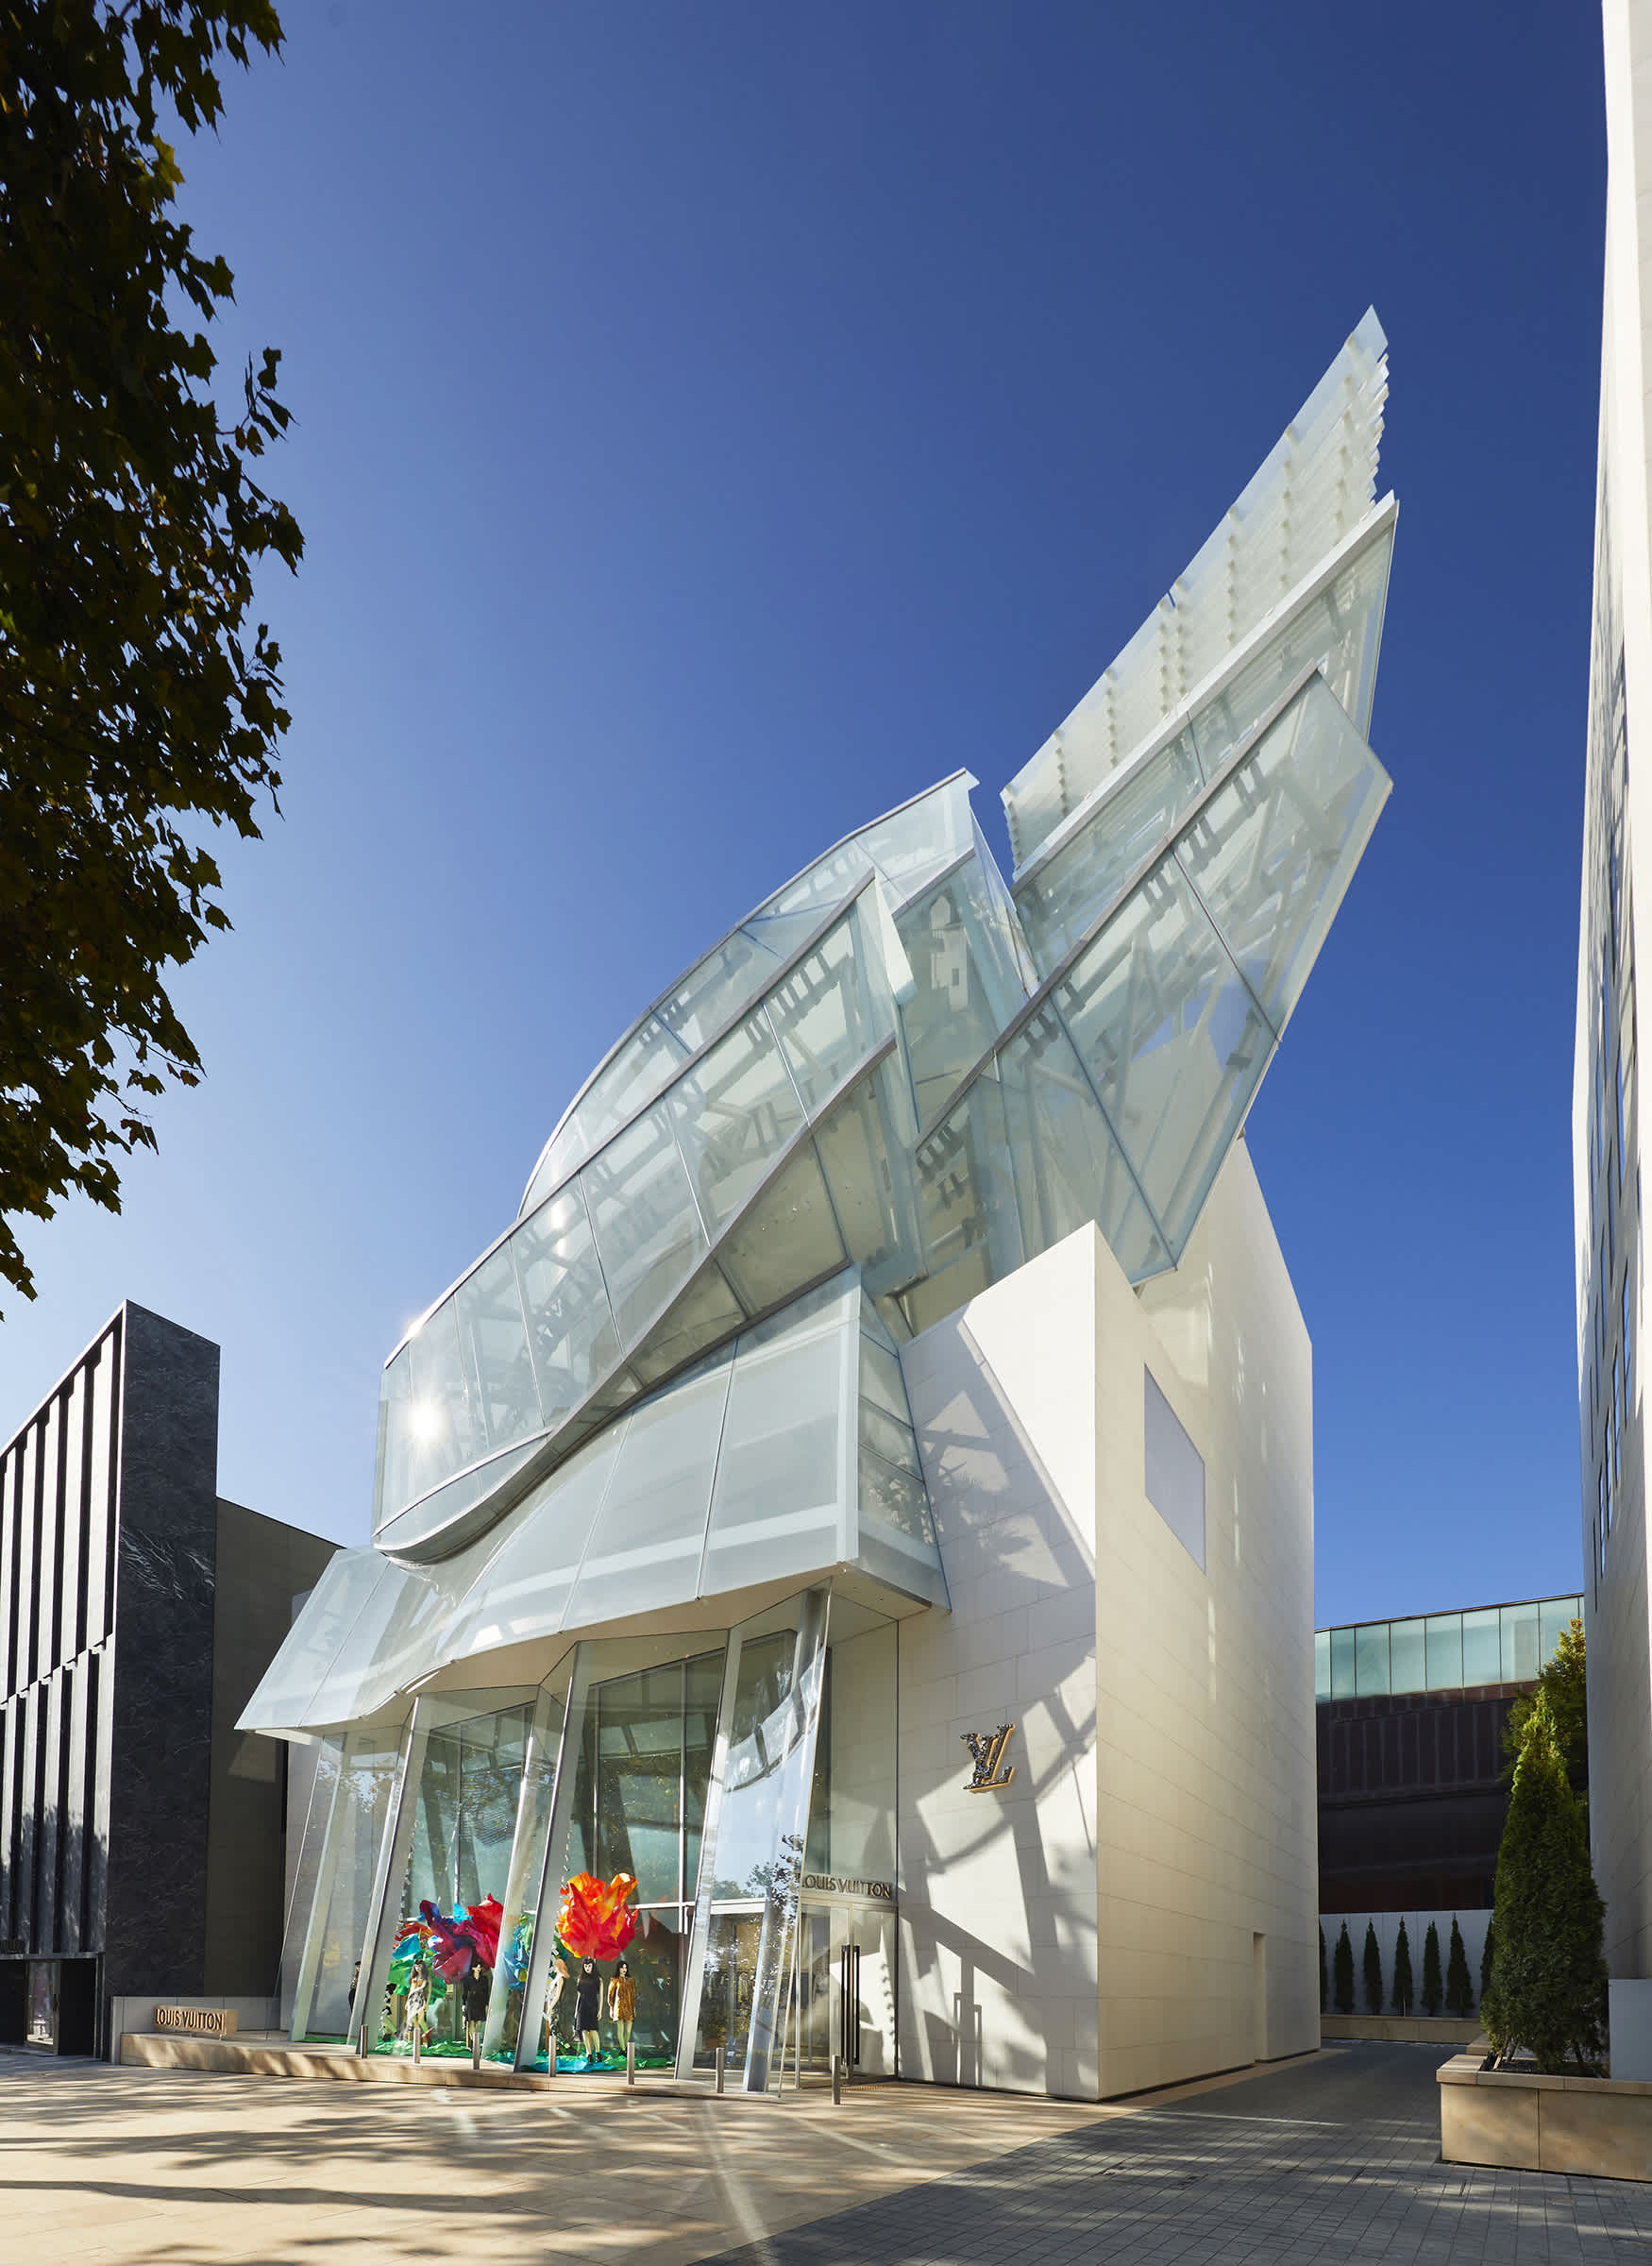 The Louis Vuitton's Maison in Seoul designed by Frank Gehry